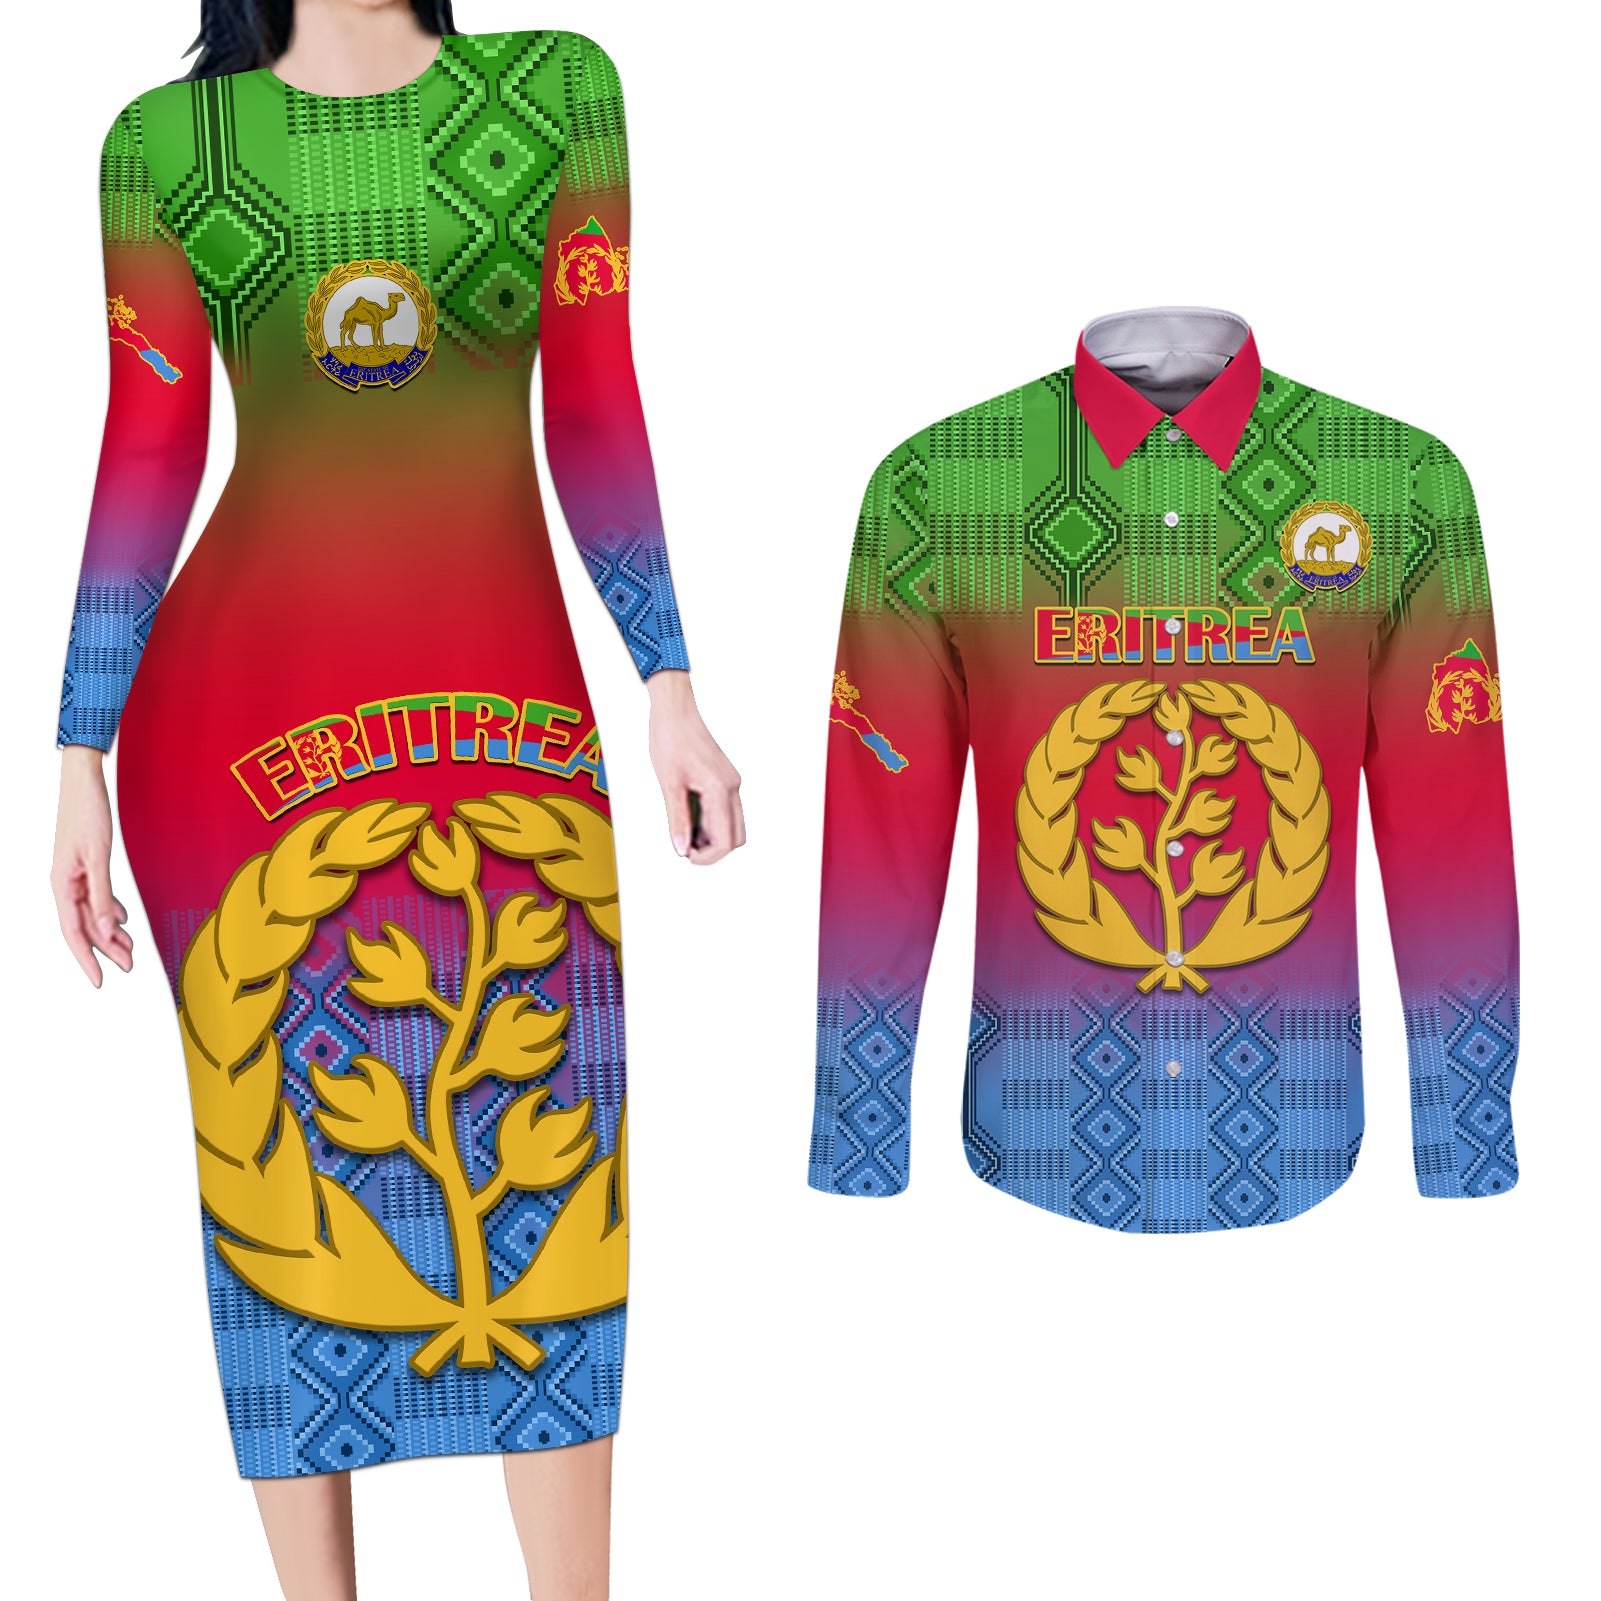 eritrea-revolution-day-couples-matching-long-sleeve-bodycon-dress-and-long-sleeve-button-shirts-eritean-kente-pattern-gradient-style